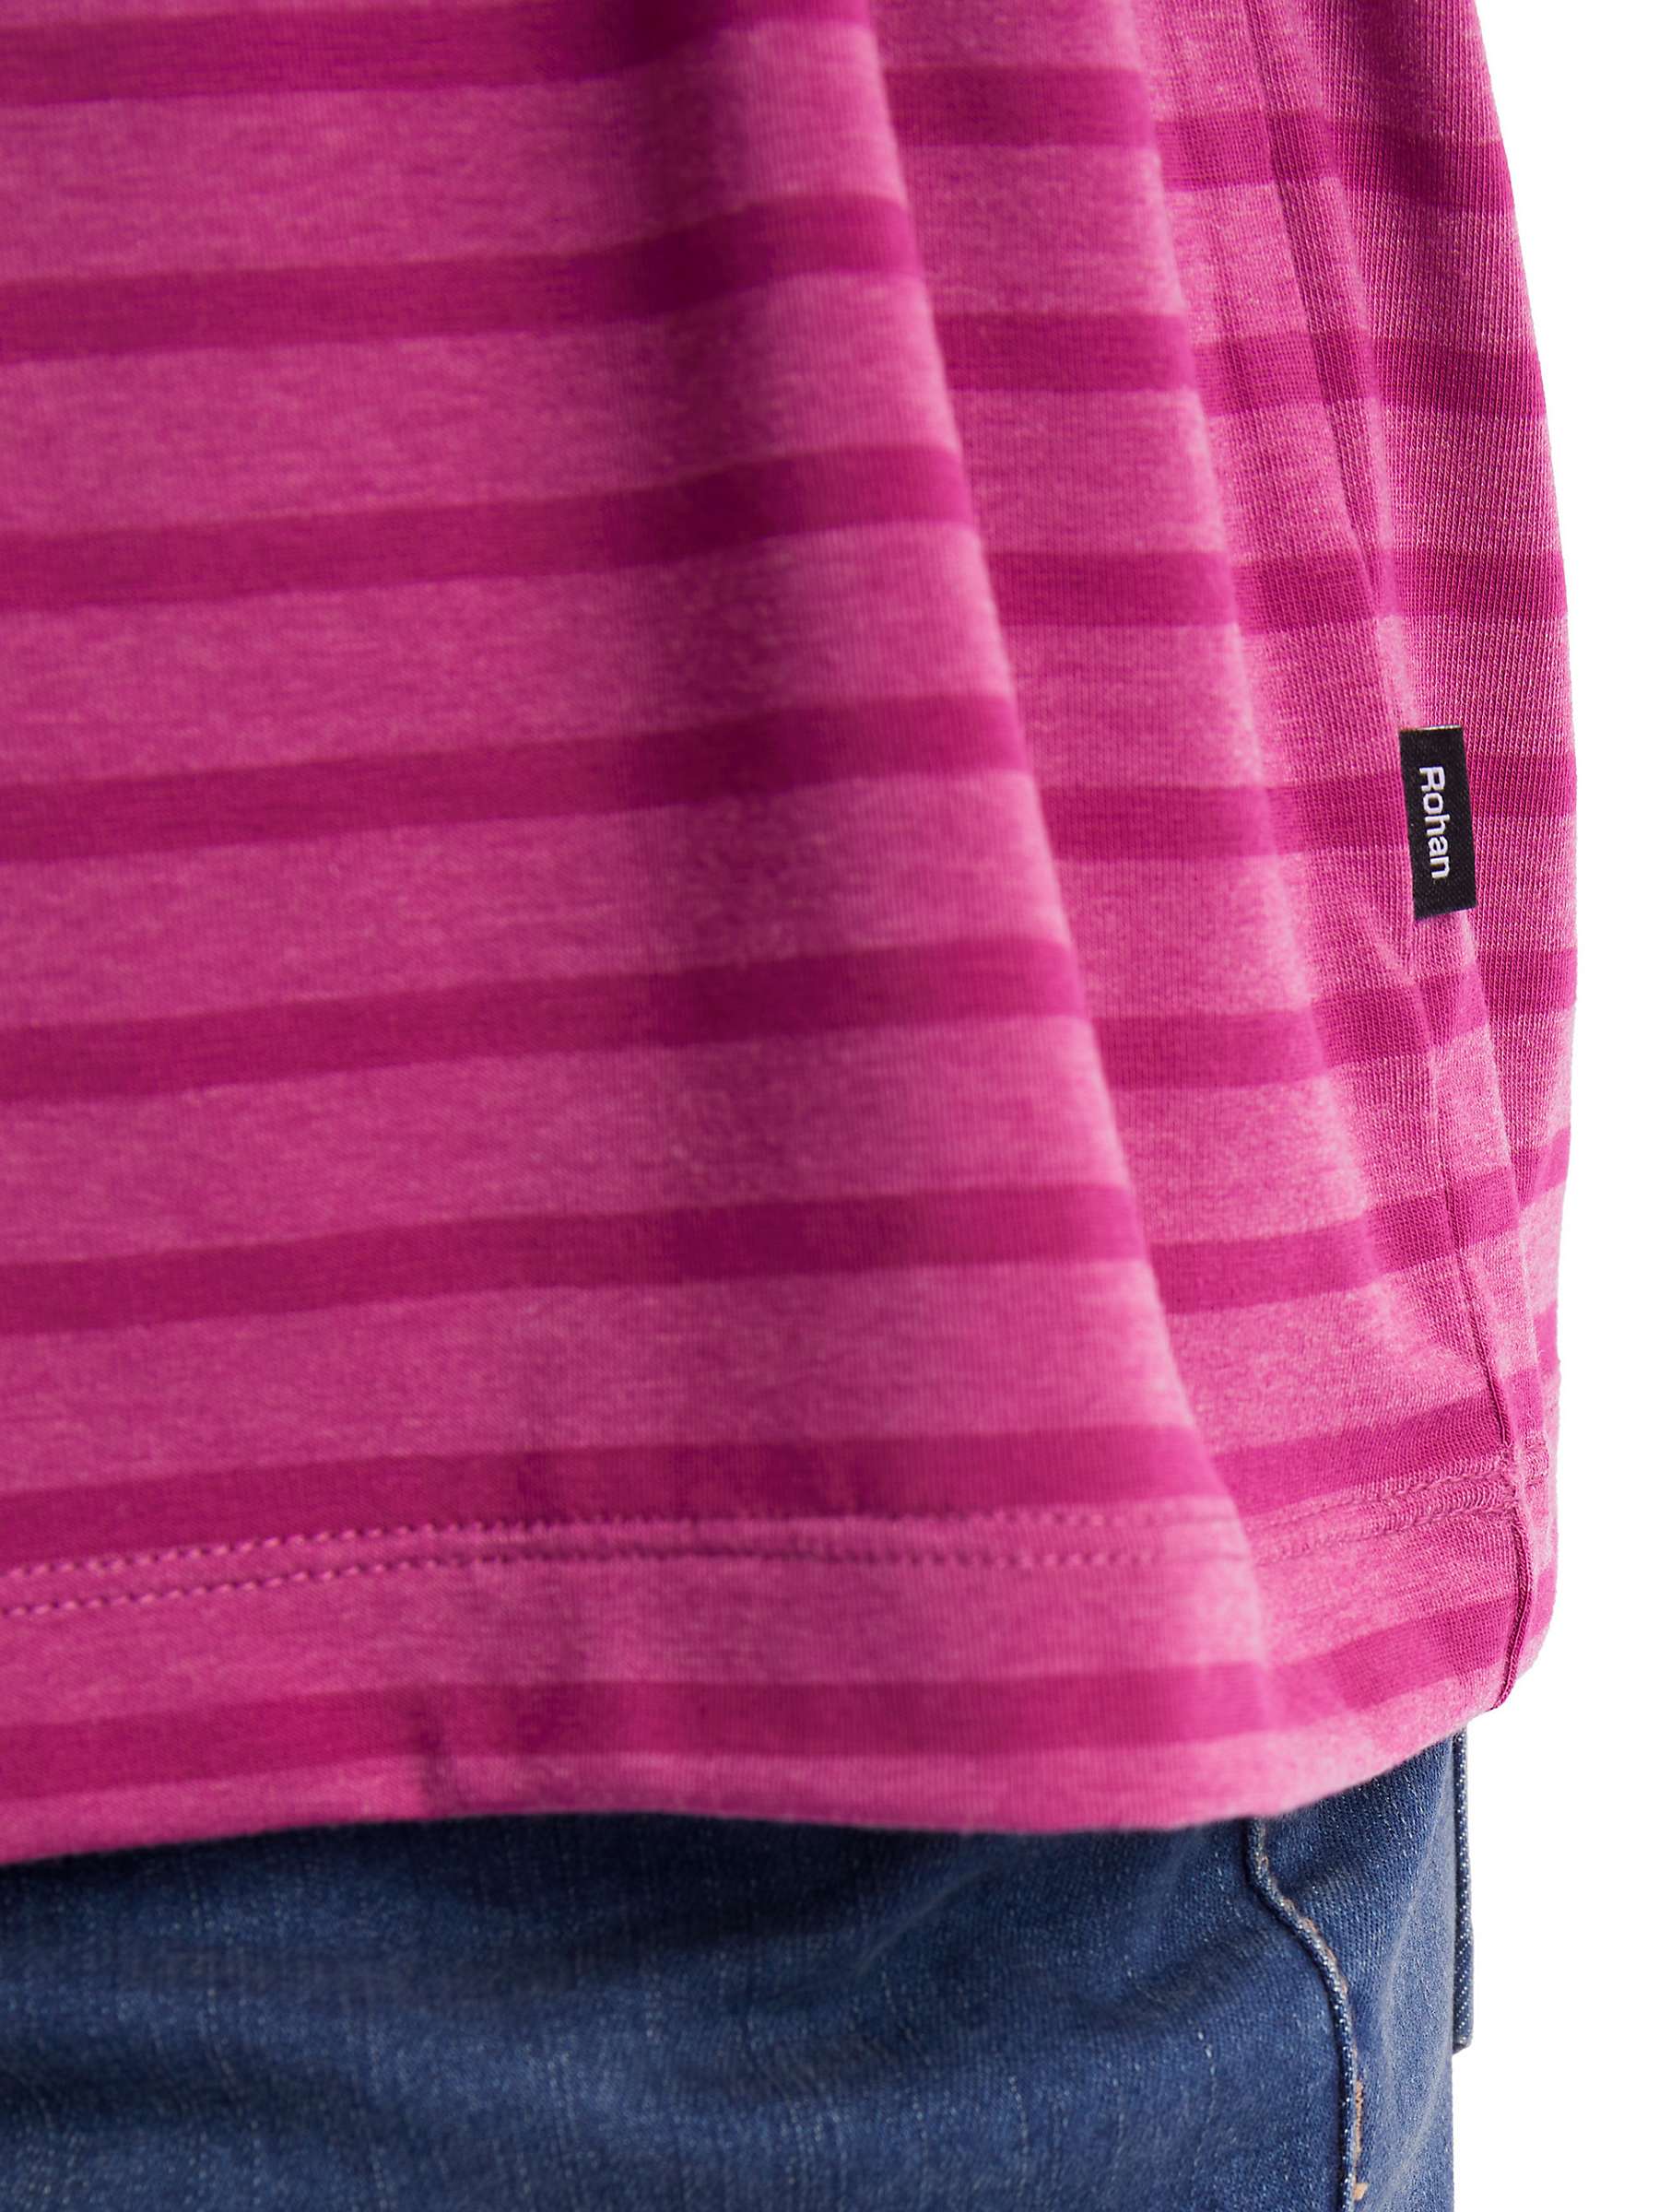 Buy Rohan Harbour Striped Top Online at johnlewis.com